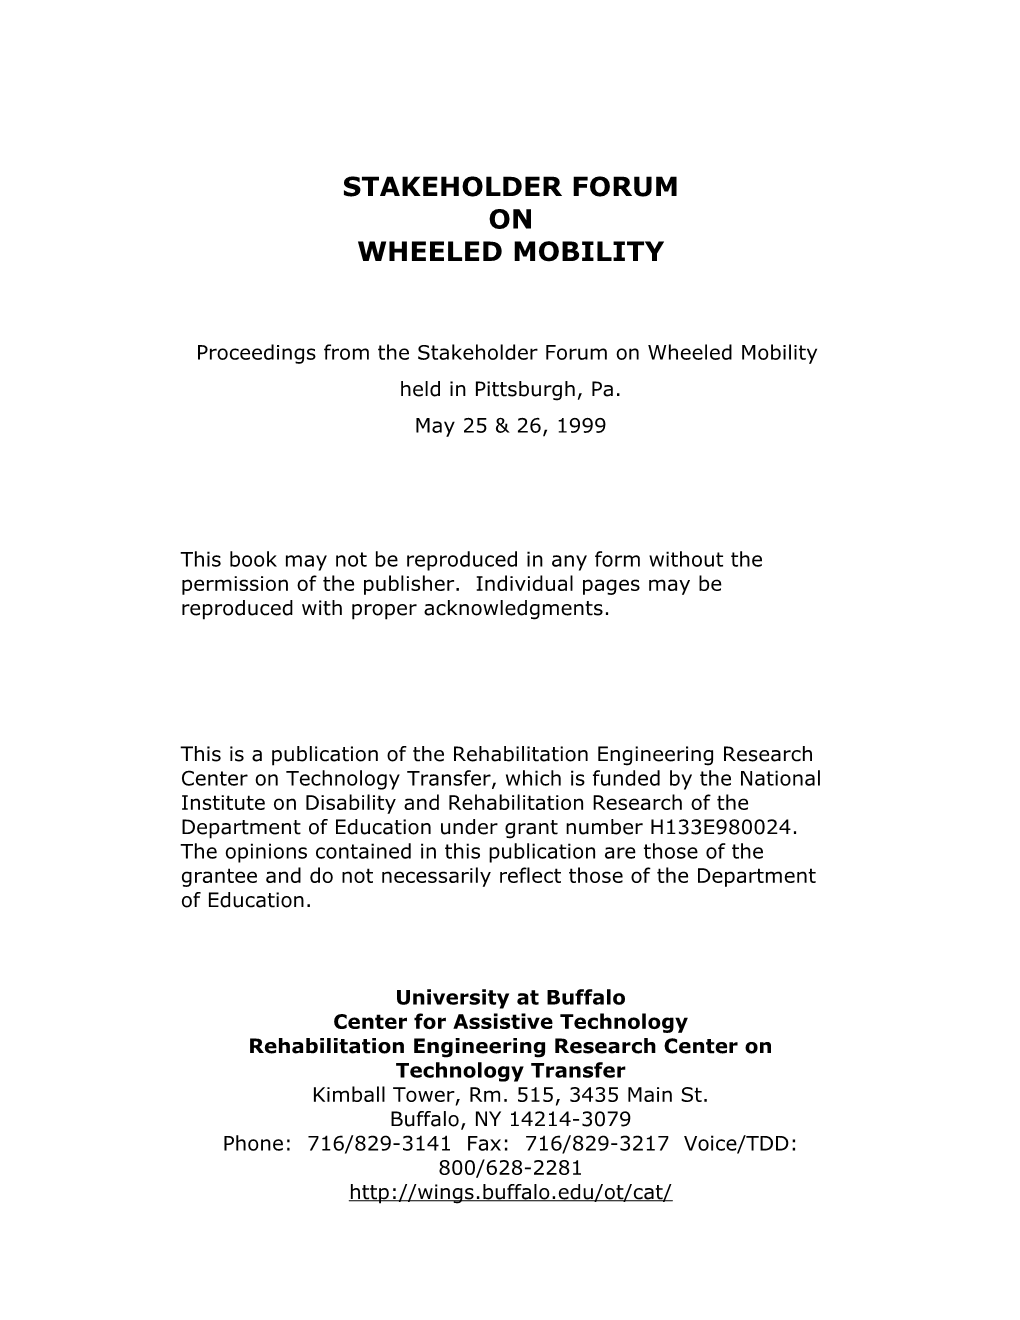 Proceedings from the Stakeholder Forum on Wheeled Mobility